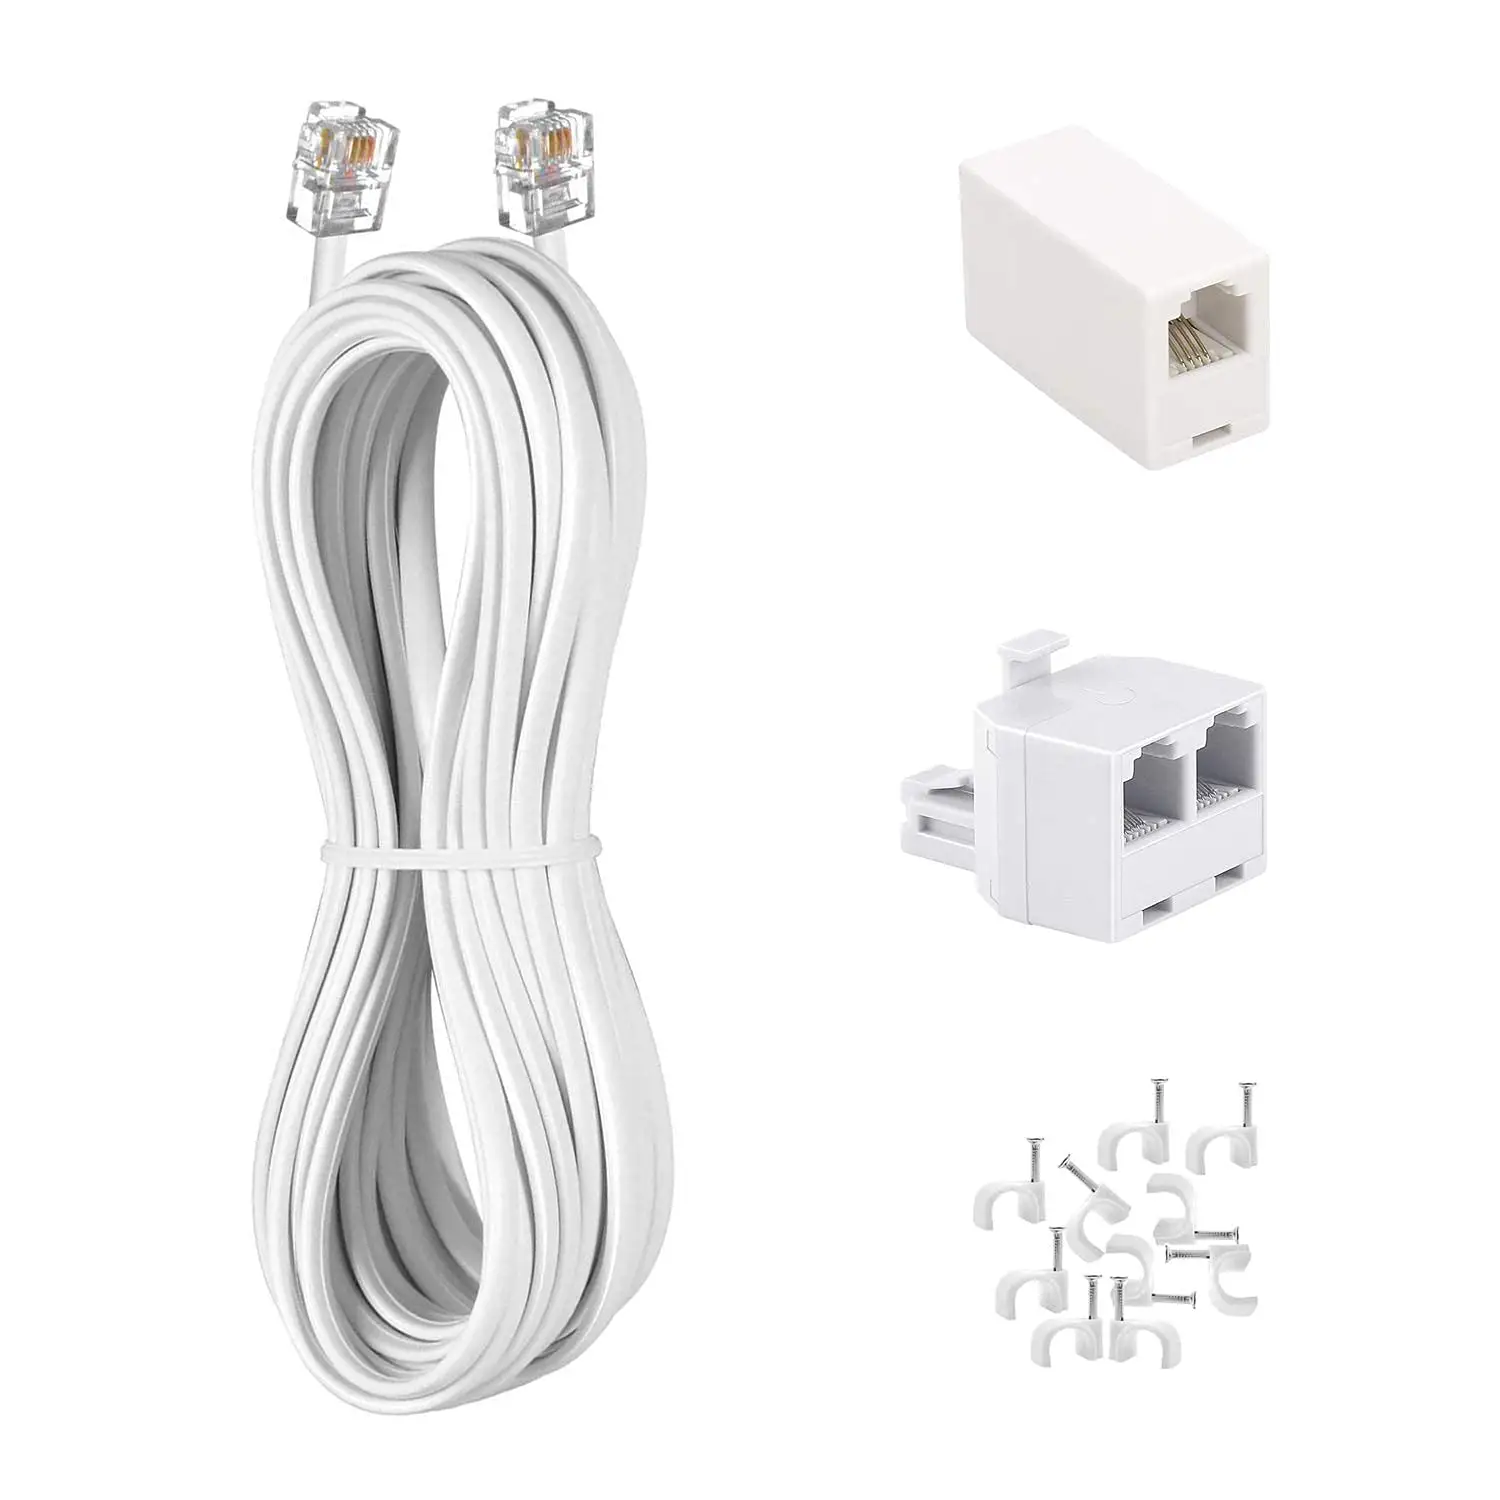 Phone Cord 6 FT, Landline Telephone Cable with RJ11 Plug, Includes Telephone Inline Coupler RJ11 Splitter and 10pcs Cable Clips